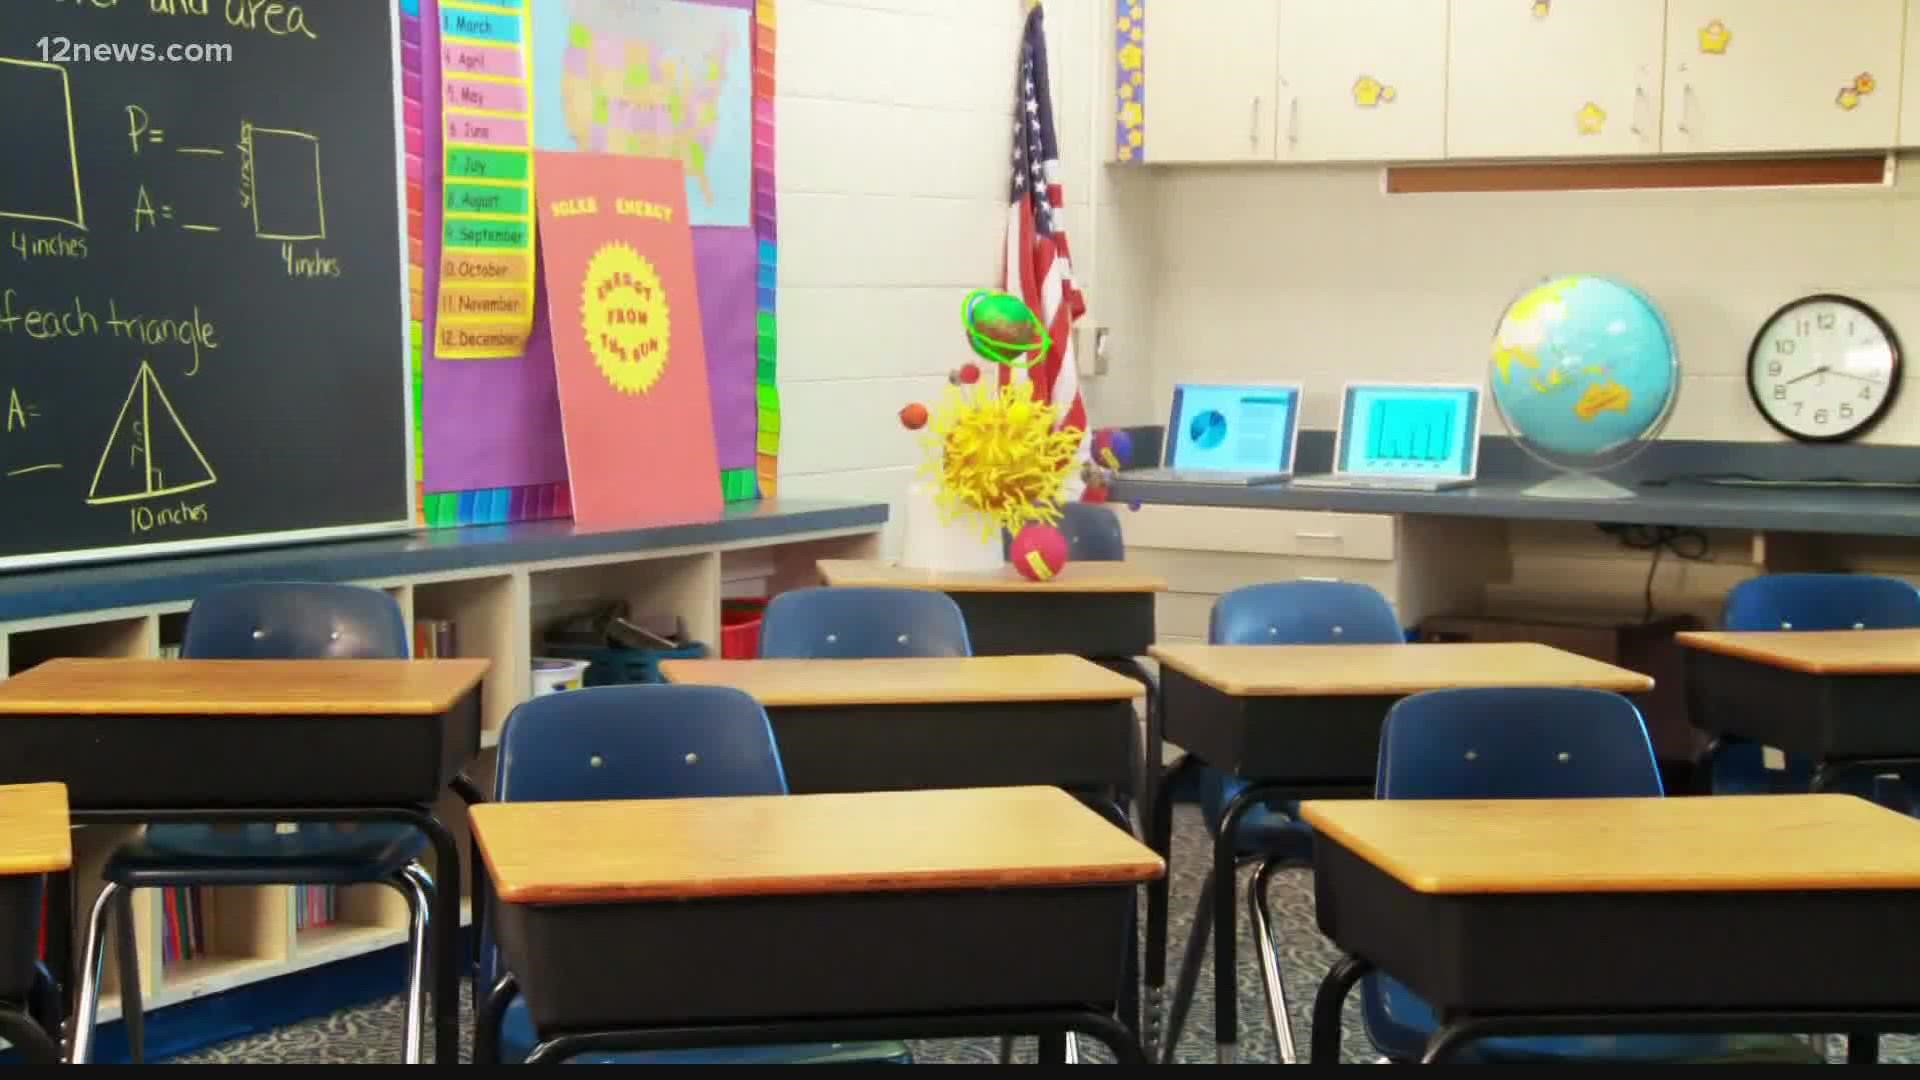 Valley schools could see major budget cuts if Arizona lawmakers don't come up with a bill to override a cap on spending scheduled to go into effect soon.